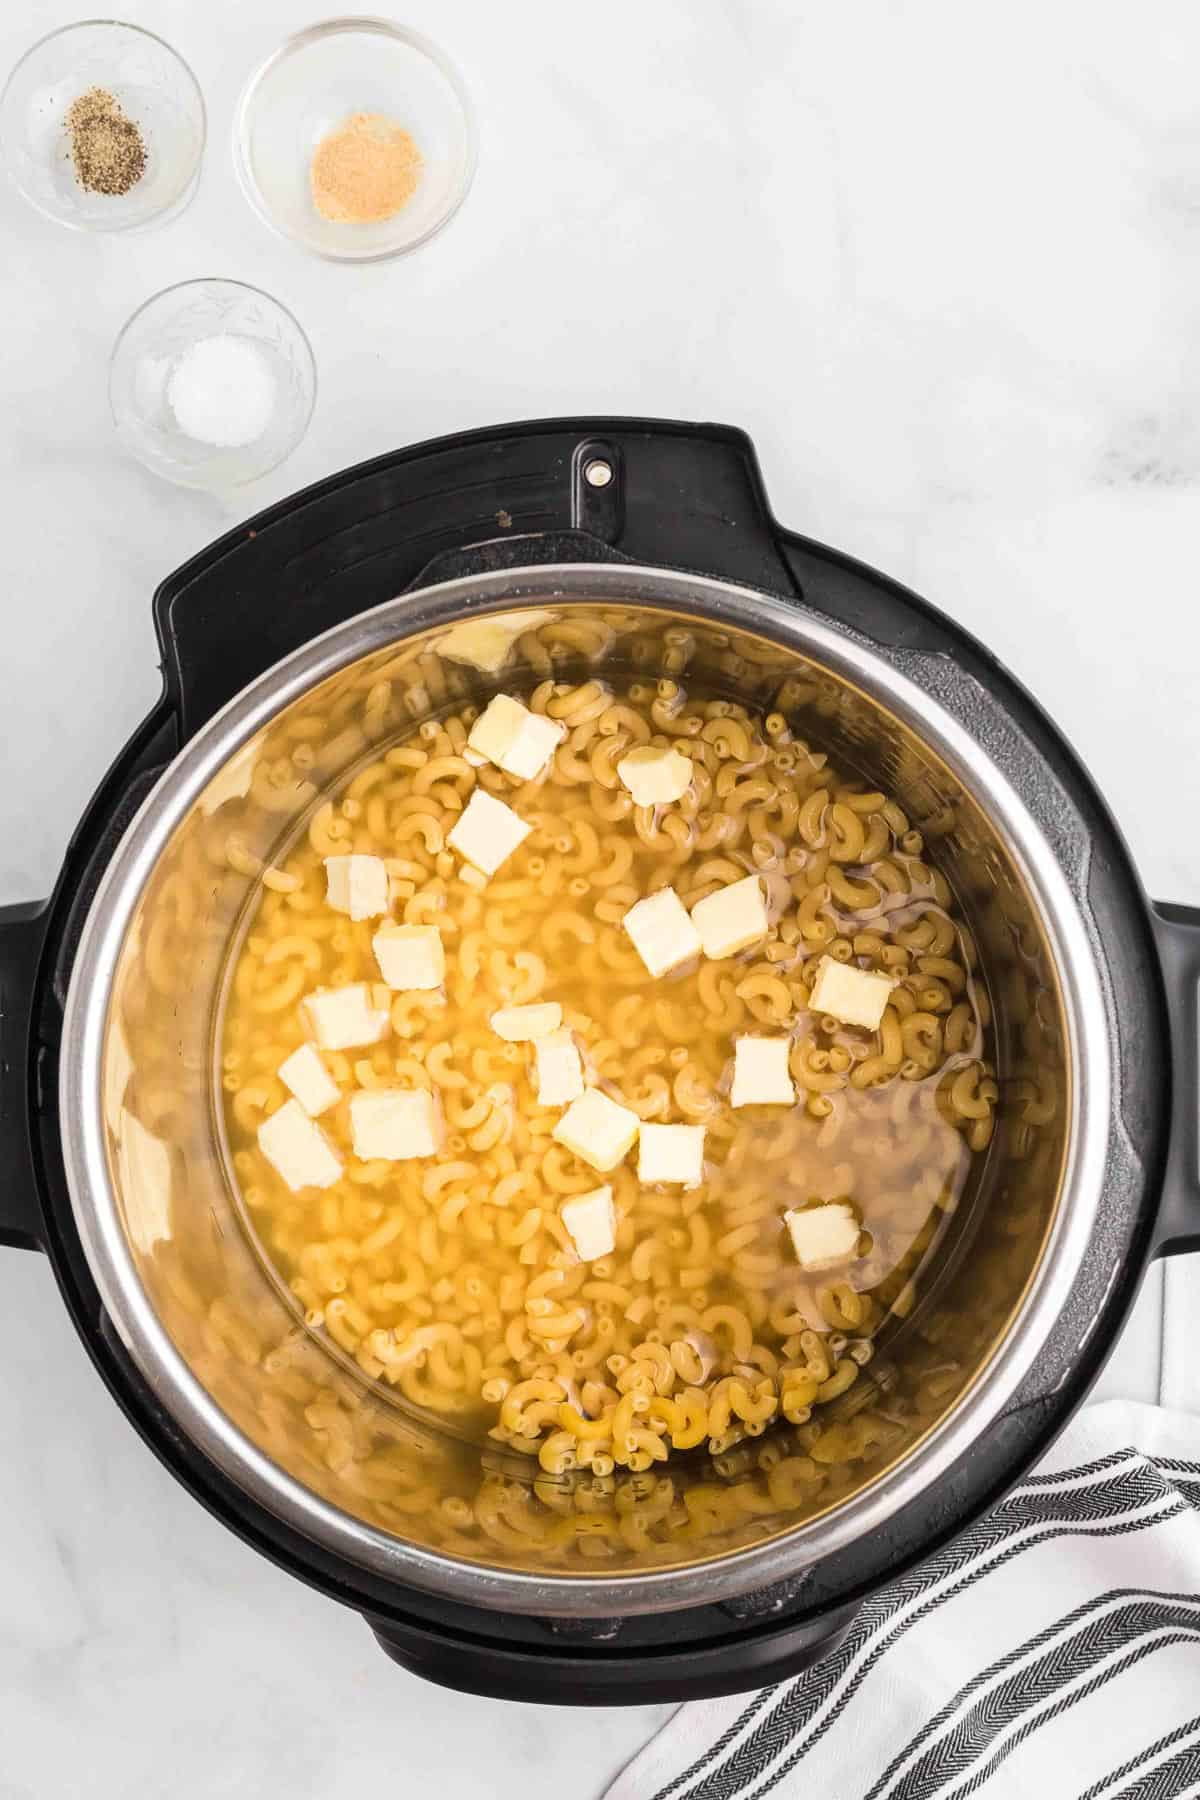 cubed butter and liquid with macaroni in an instant pot